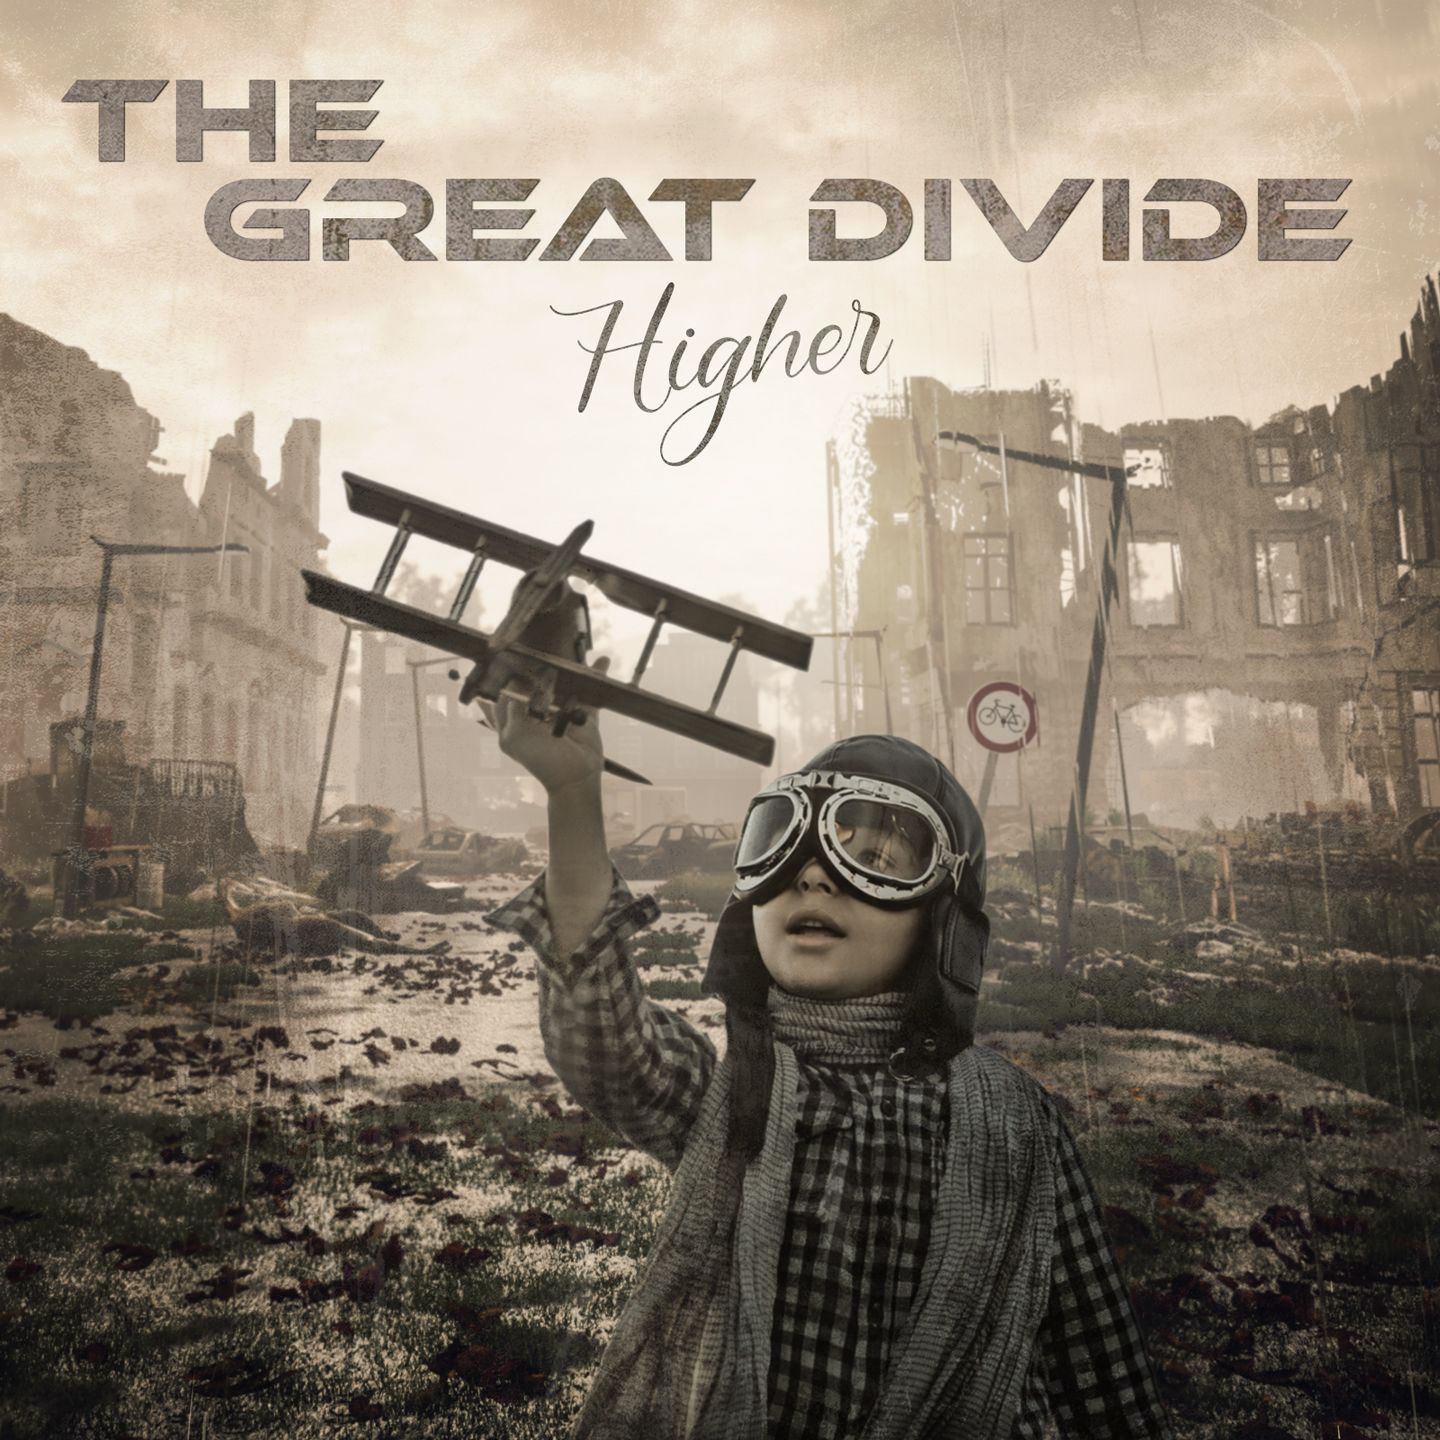 The Great Divide – “Higher”